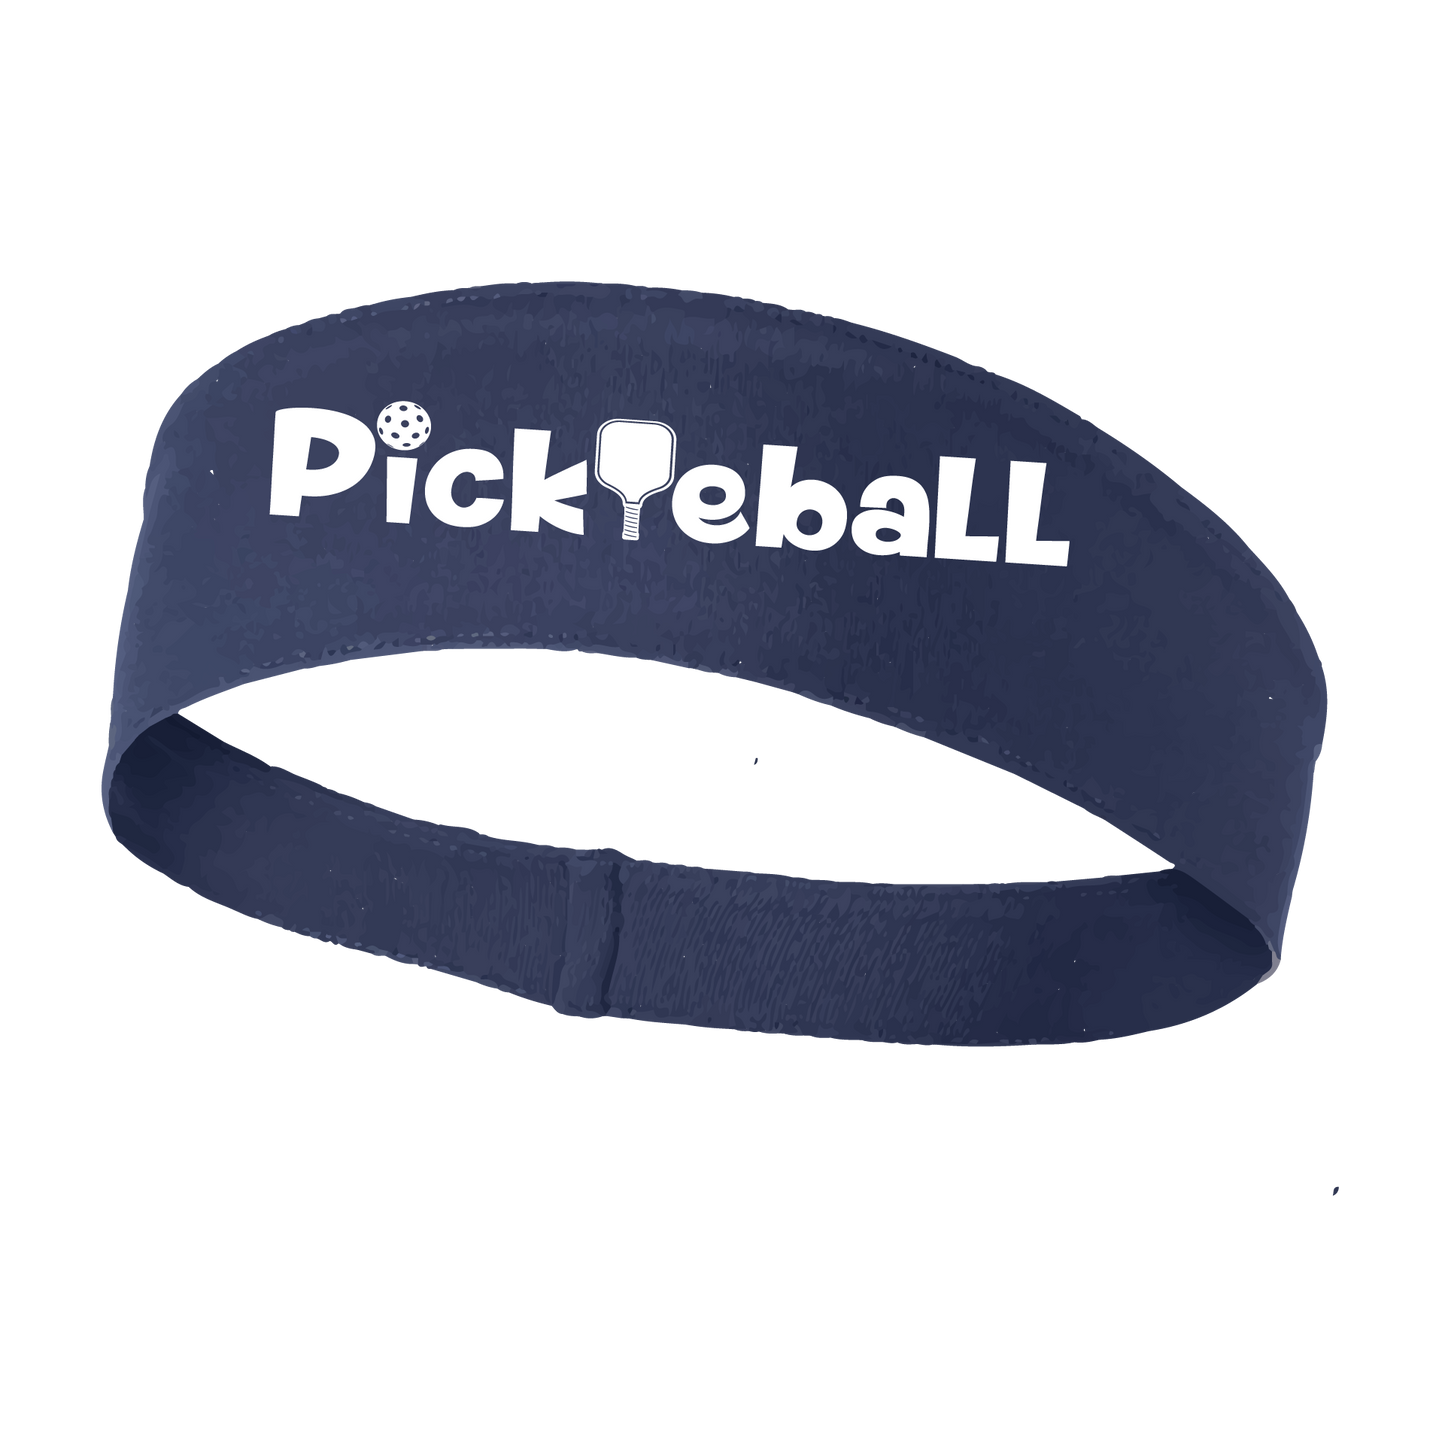 Pickleball Design: Pickleball words in white  This fun, pickleball designed, moisture-wicking headband narrows in the back to fit more securely. Single-needle top-stitched edging. These headbands come in a variety of colors. Truly shows your love for the sport of pickleball!!